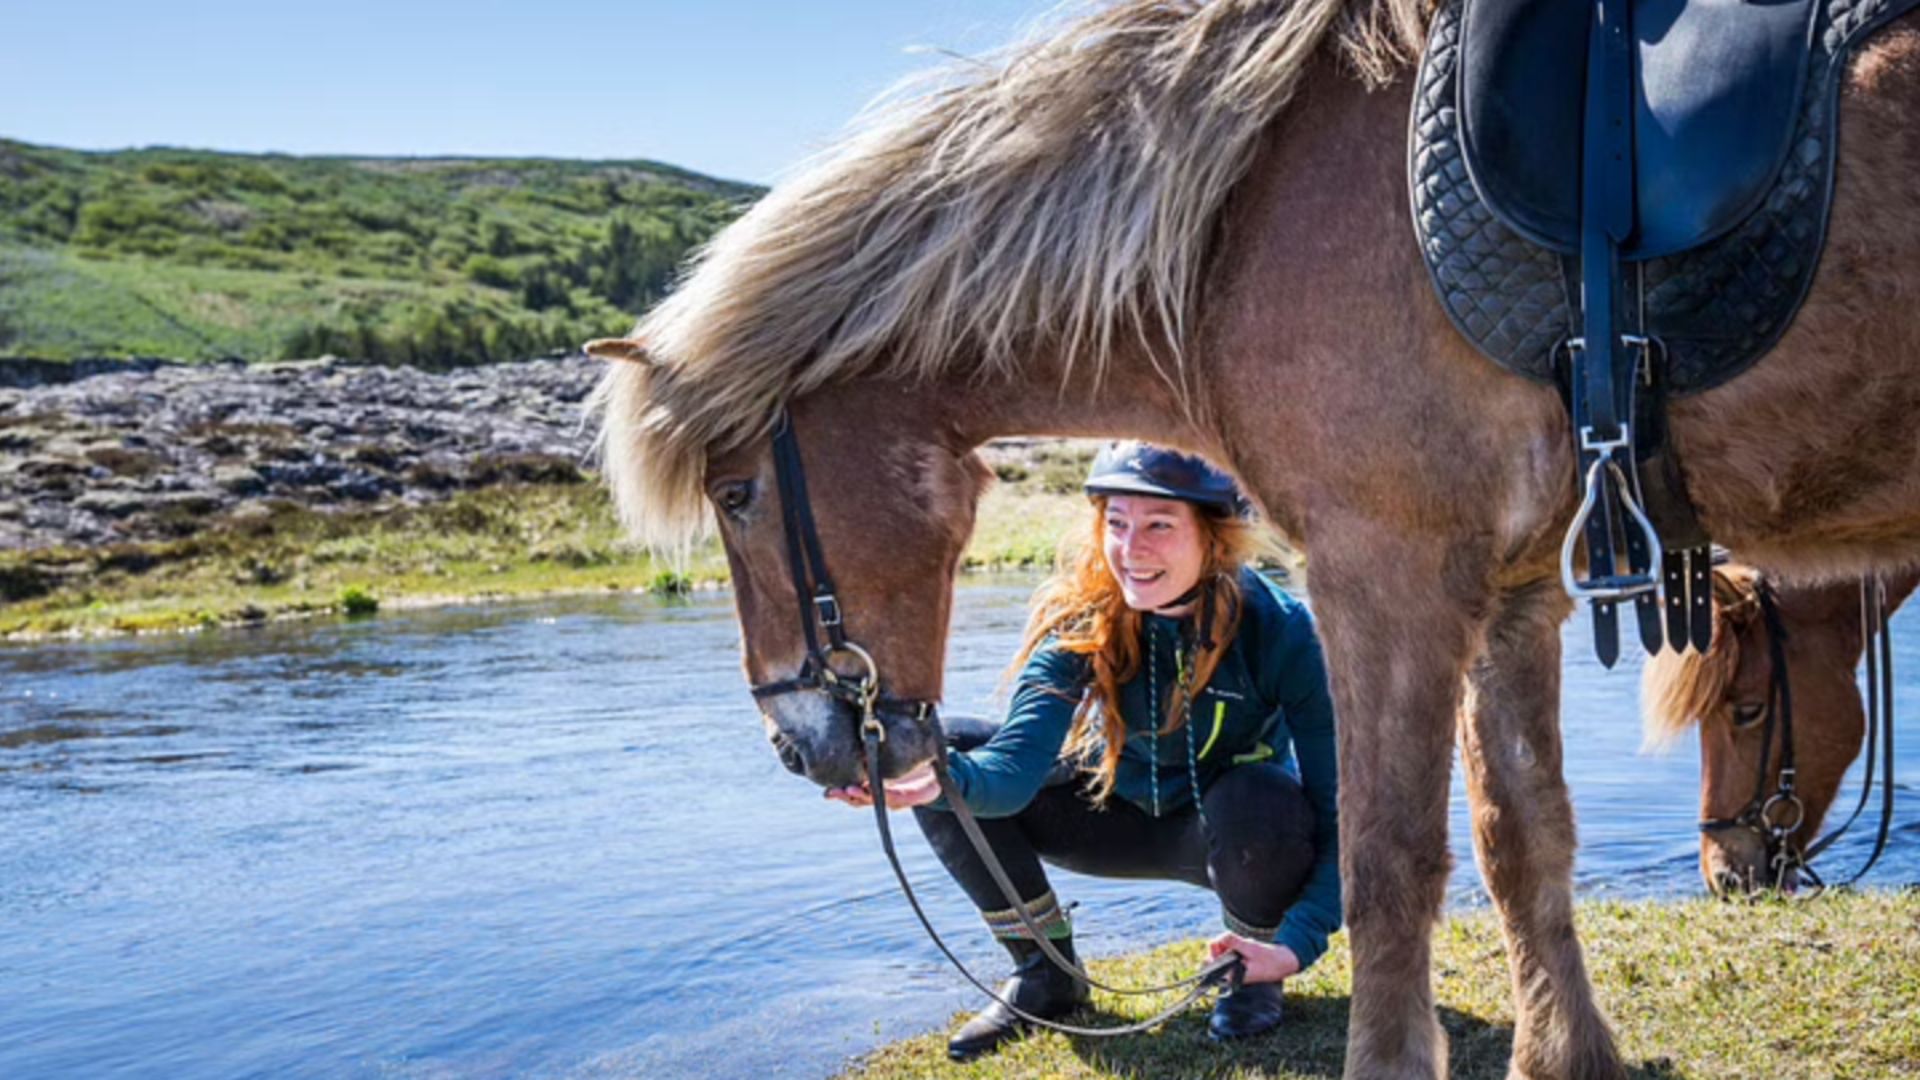 Tourist with the Icelandic horse near a river during the tour